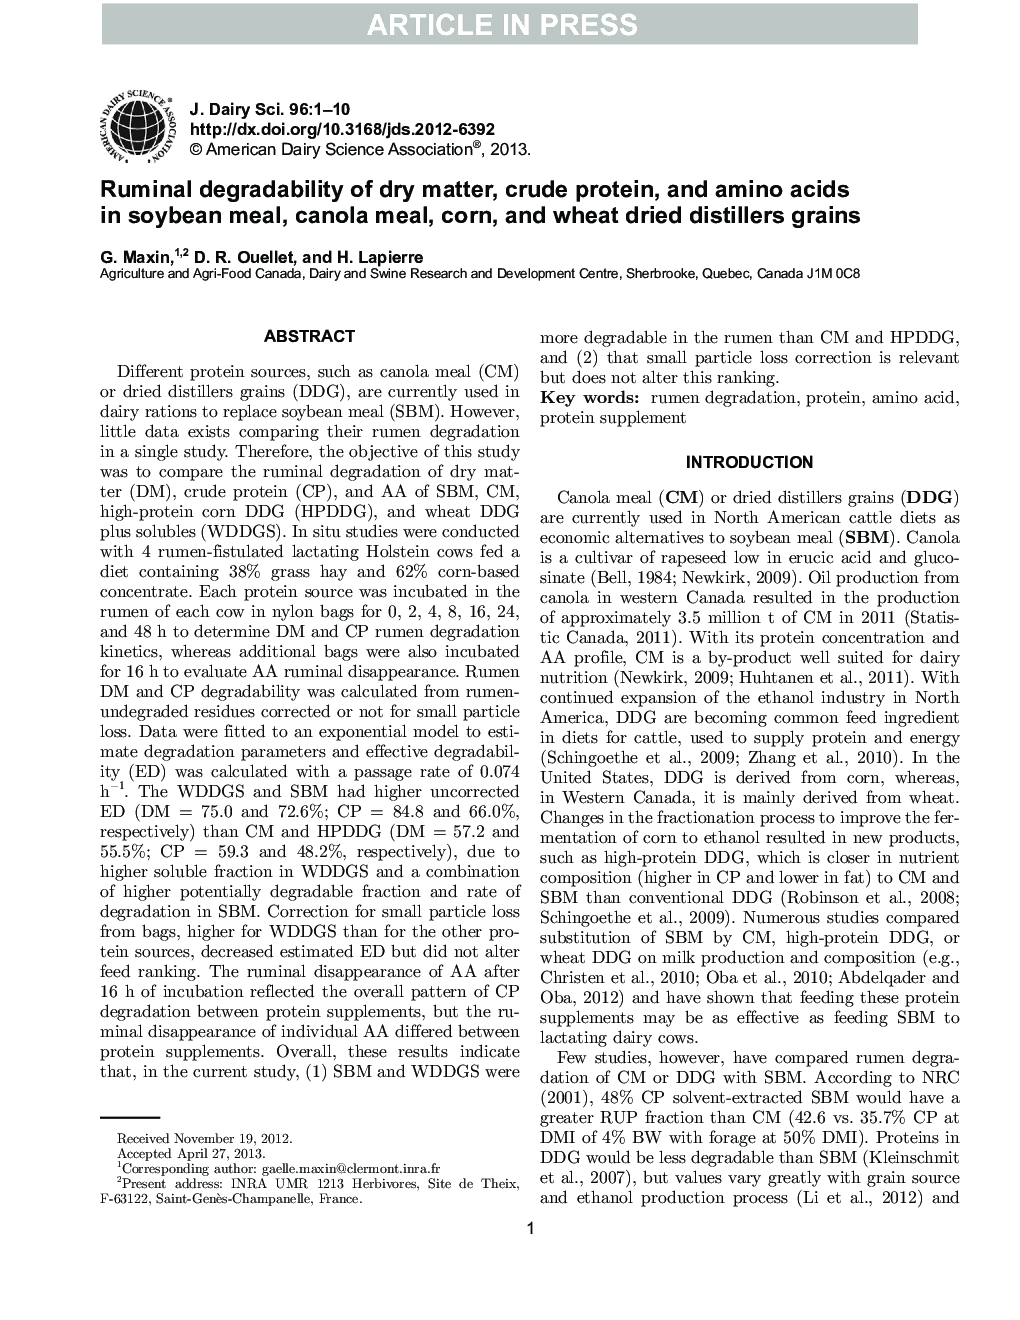 Ruminal degradability of dry matter, crude protein, and amino acids in soybean meal, canola meal, corn, and wheat dried distillers grains